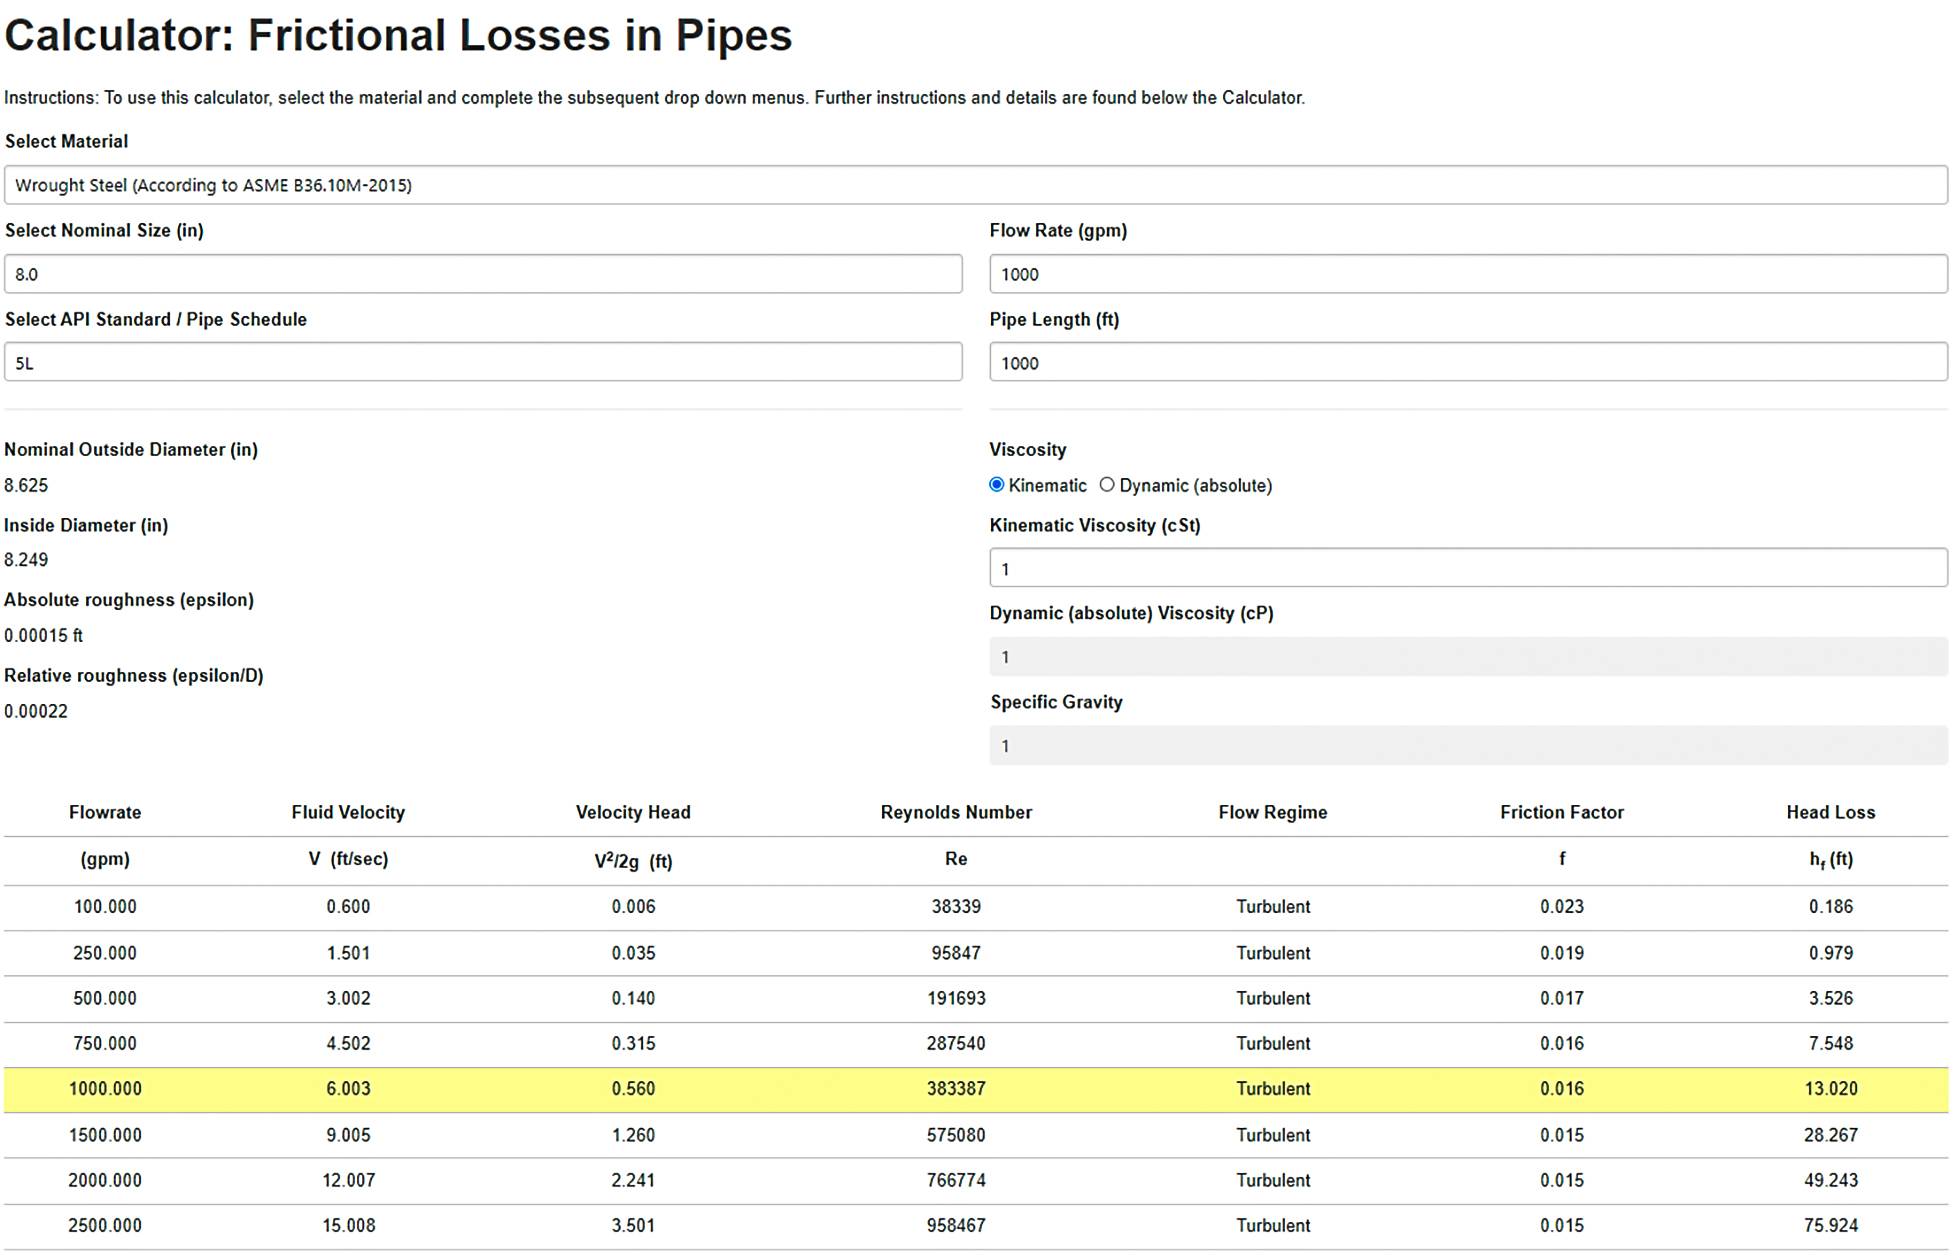 IMAGE 1: HI Engineering Data Library friction head loss in pipe calculator